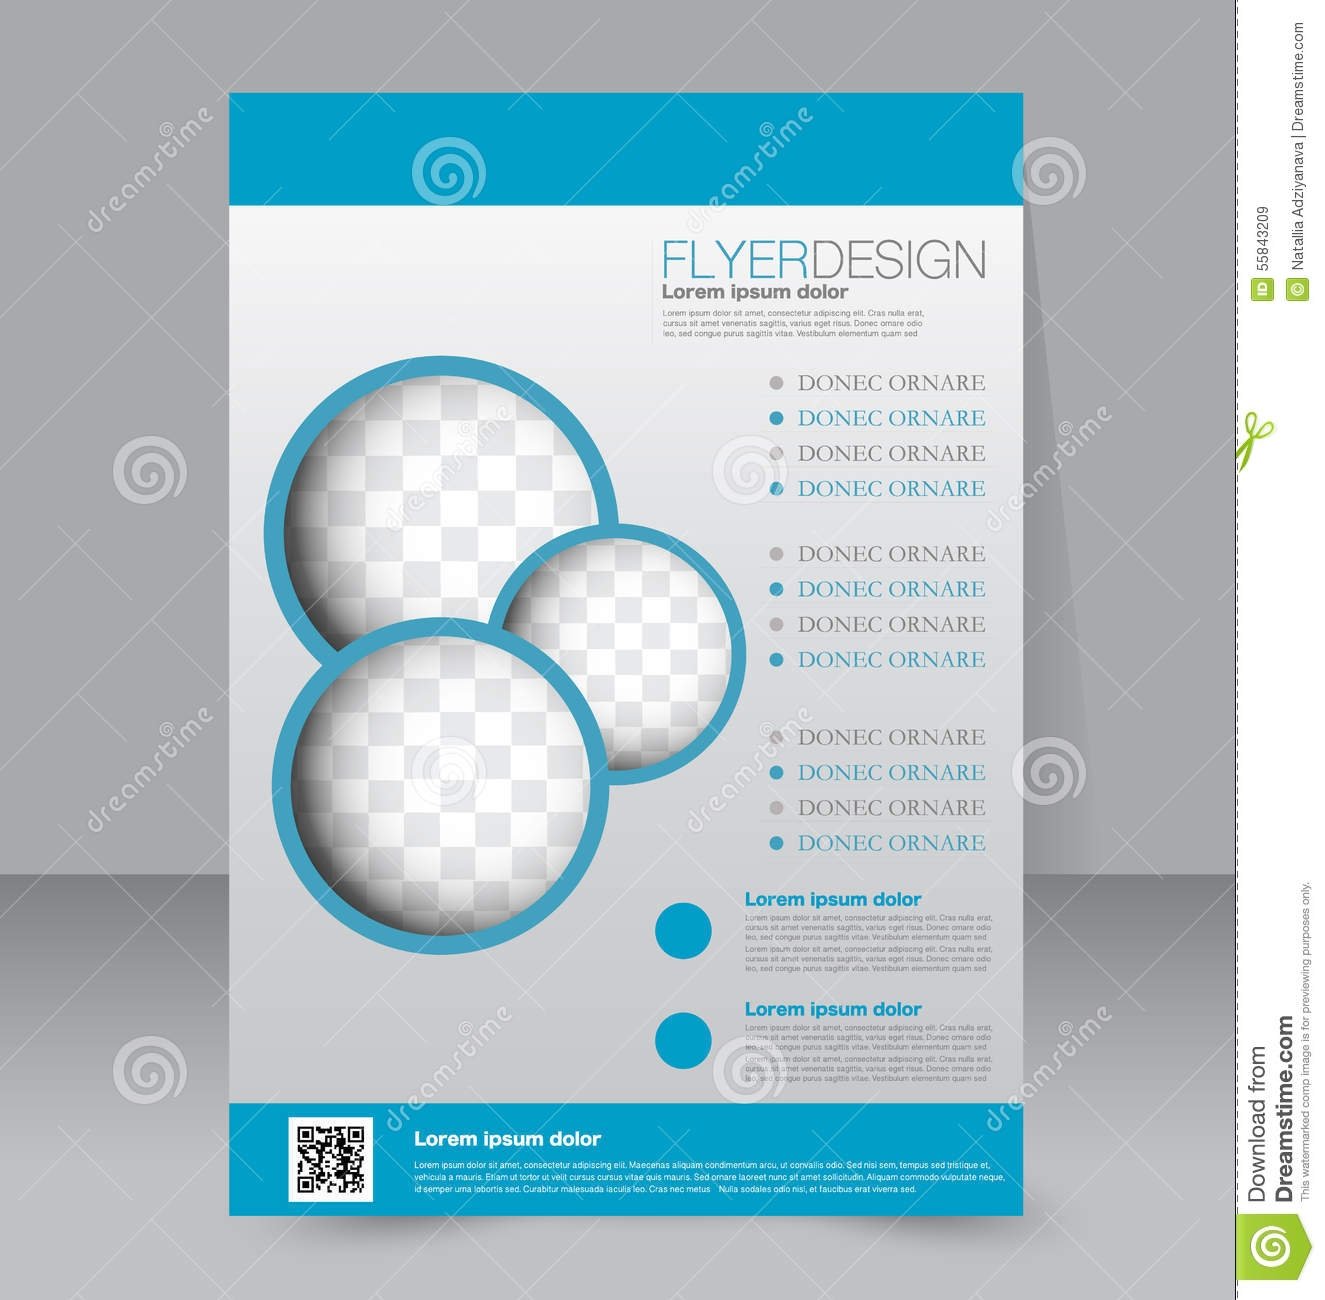 Free Editable Templates Download